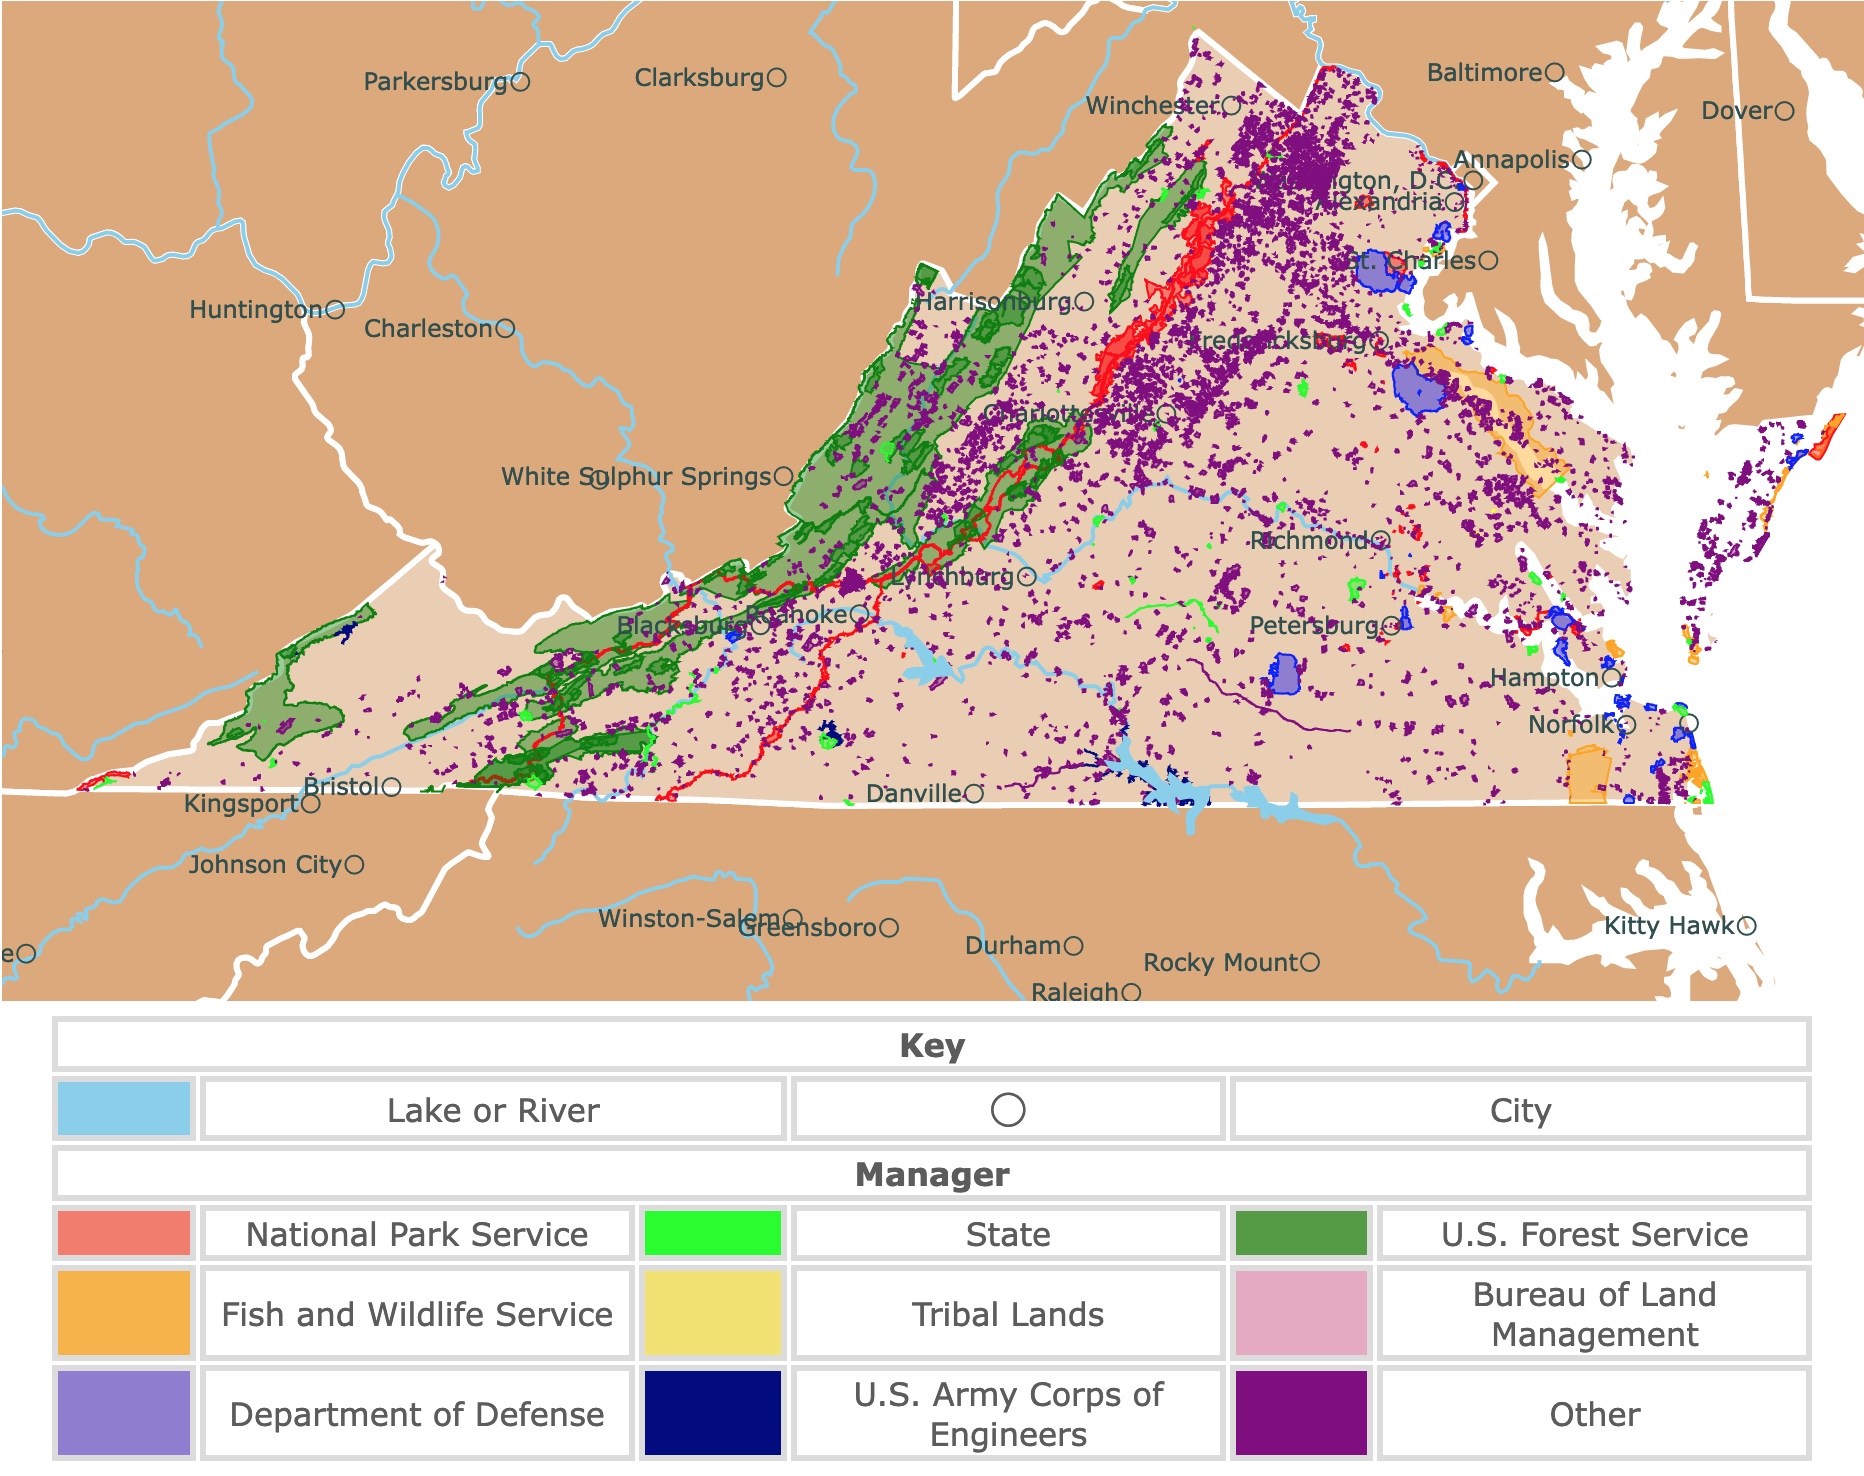 Map of Virginia's state parks, national parks, forests, and public lands areas